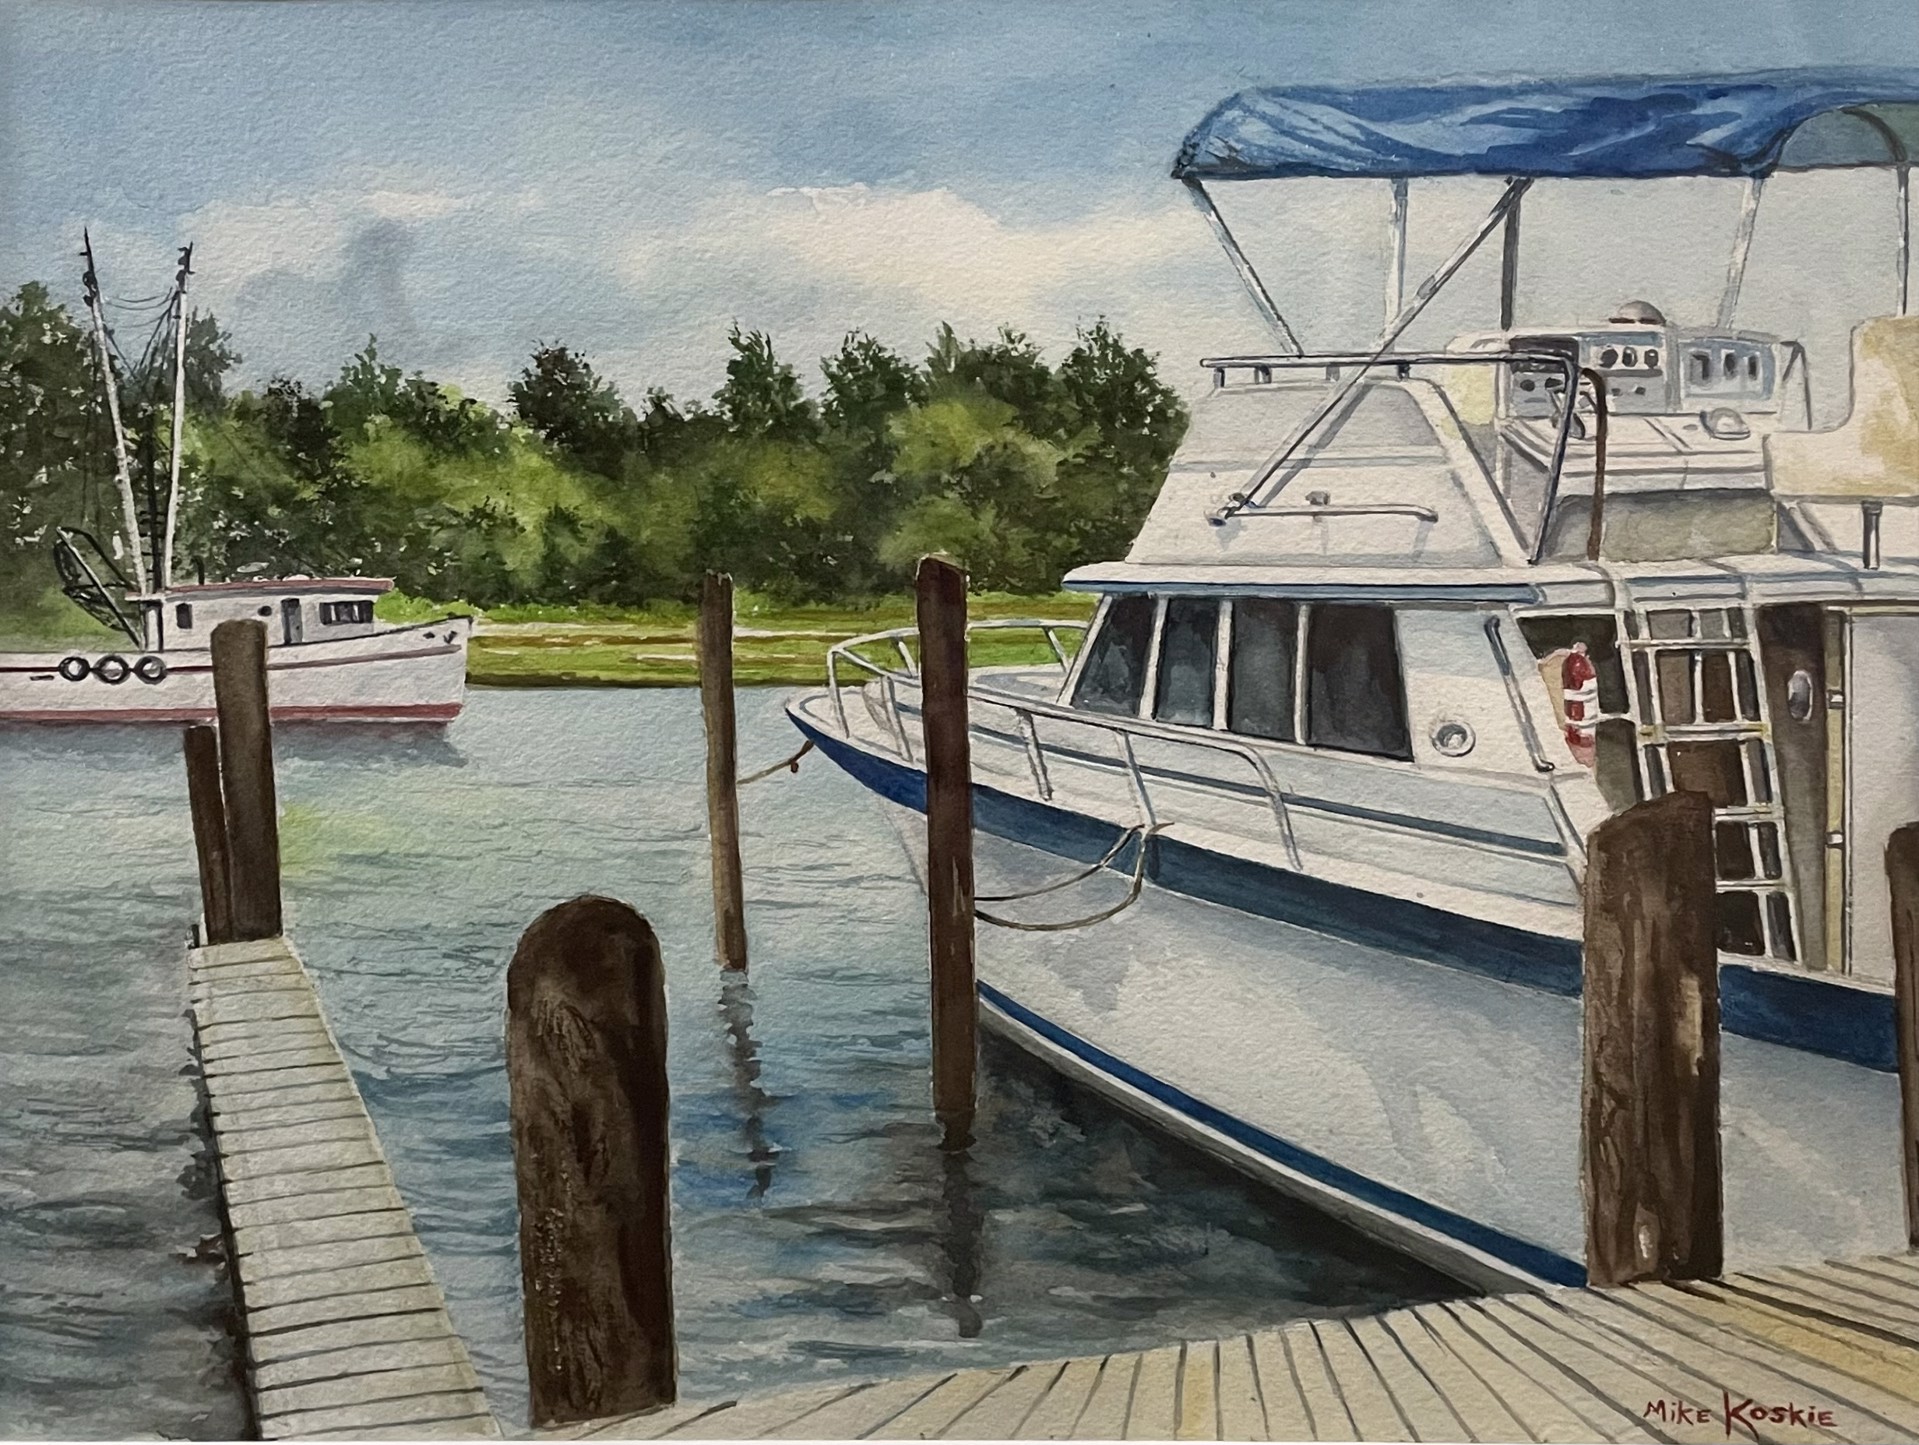 Docked On the Coast by Mike Koskie